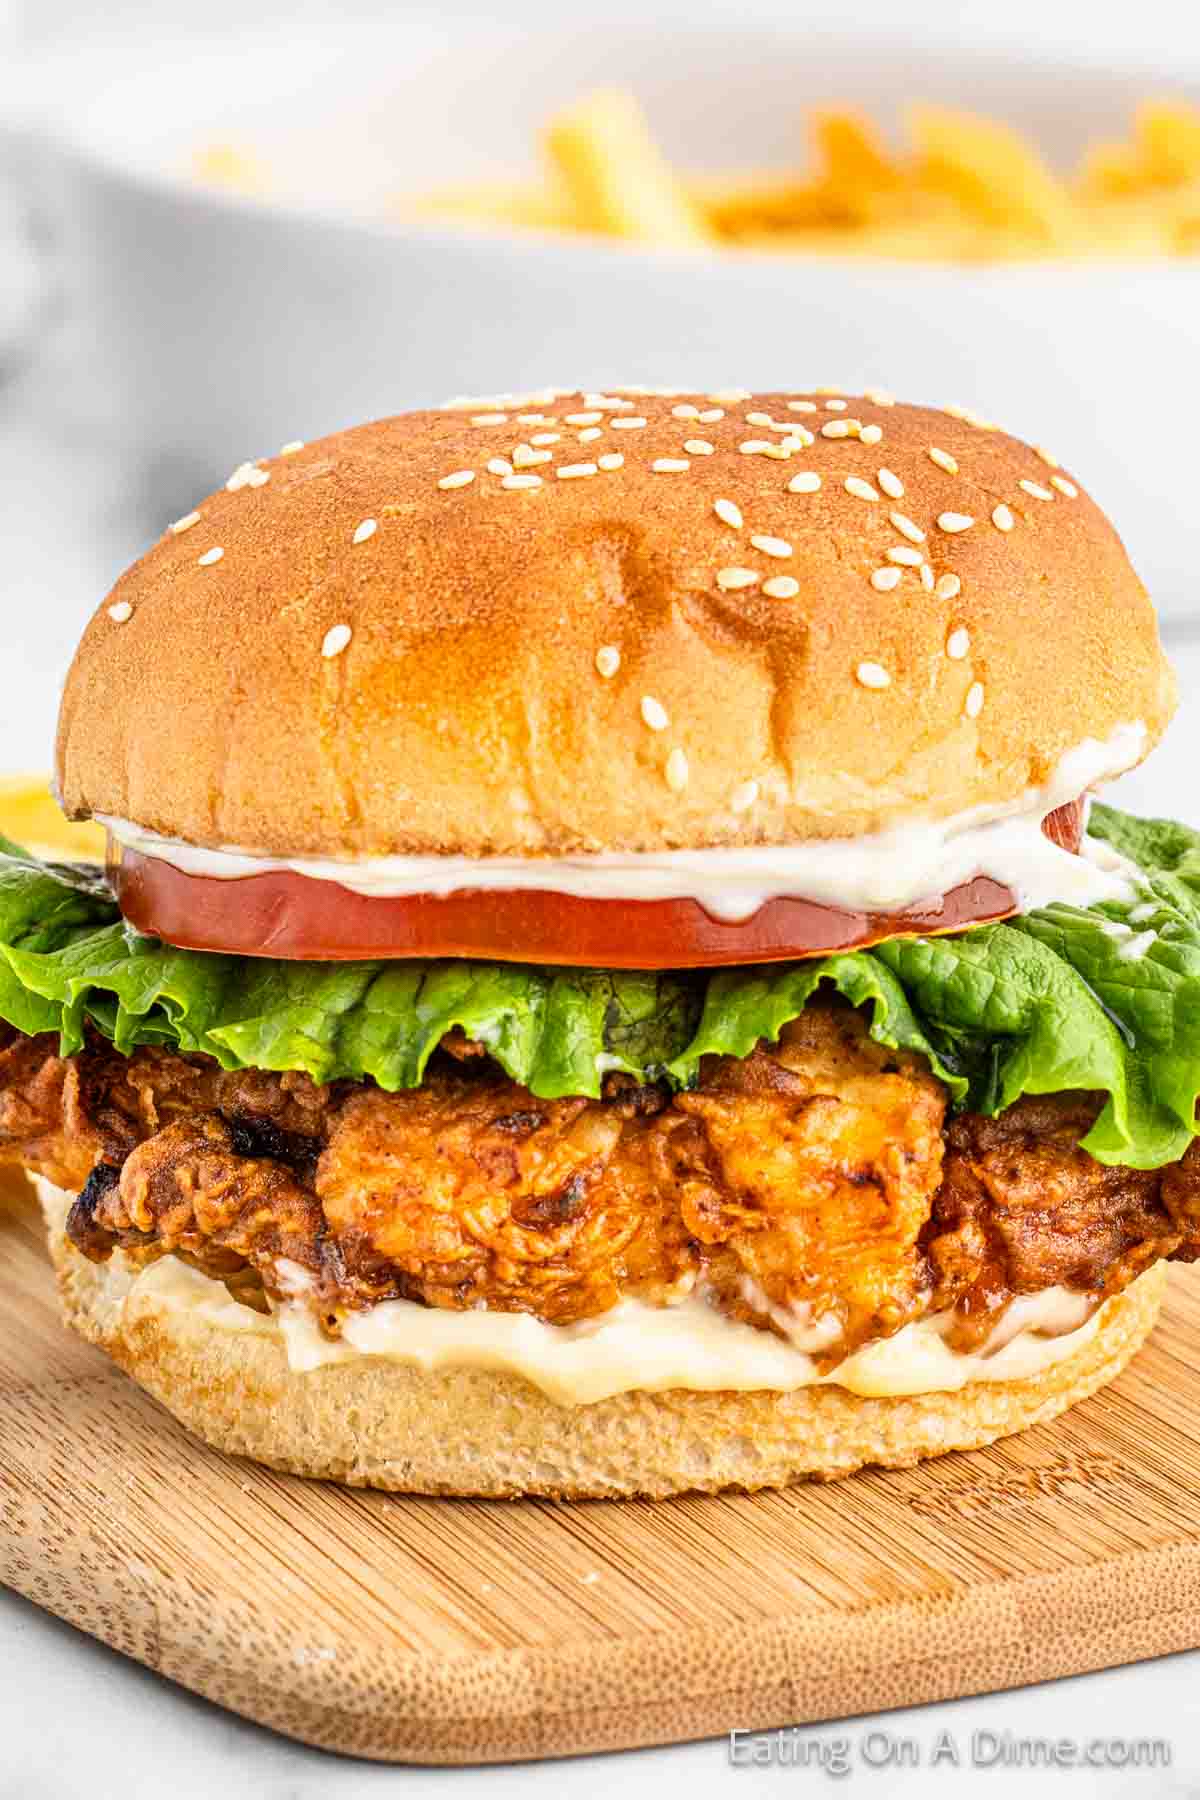 Crispy Chicken Sandwich topped with mayo, slice tomato, and lettuce with a sesame bun